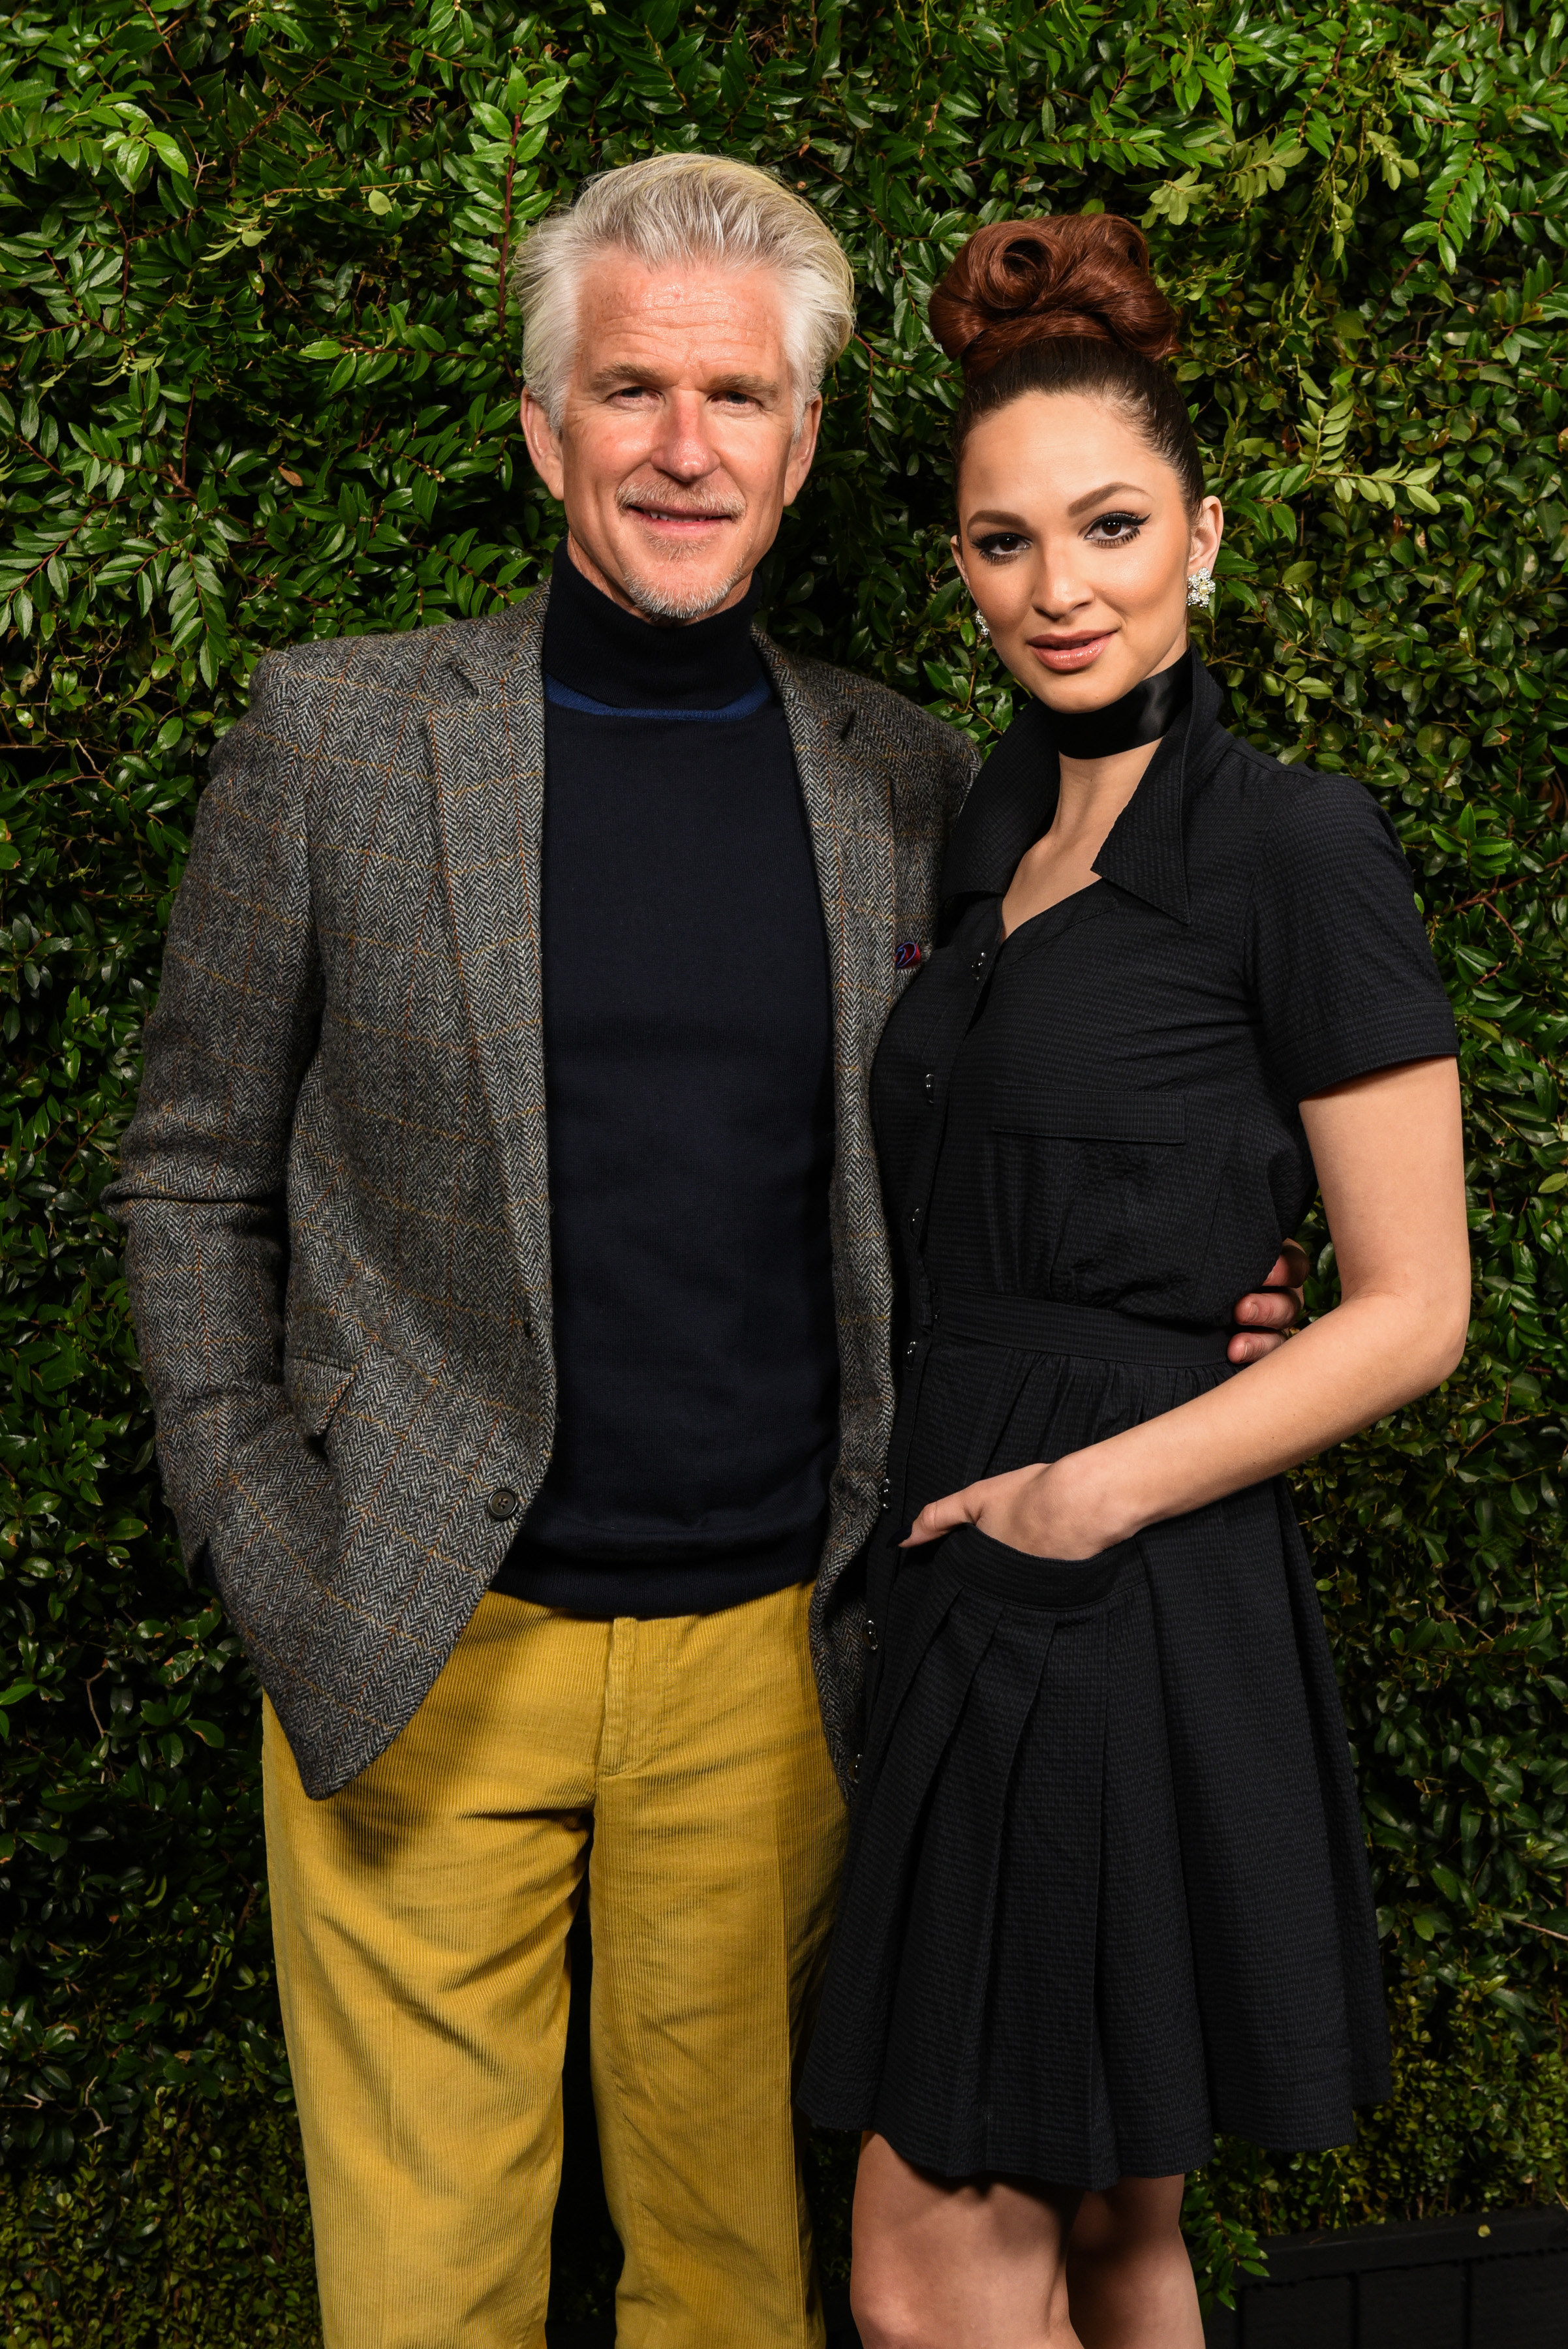 Matthew in a turtleneck with his arm around Ruby in a short dress against a backdrop of greenery